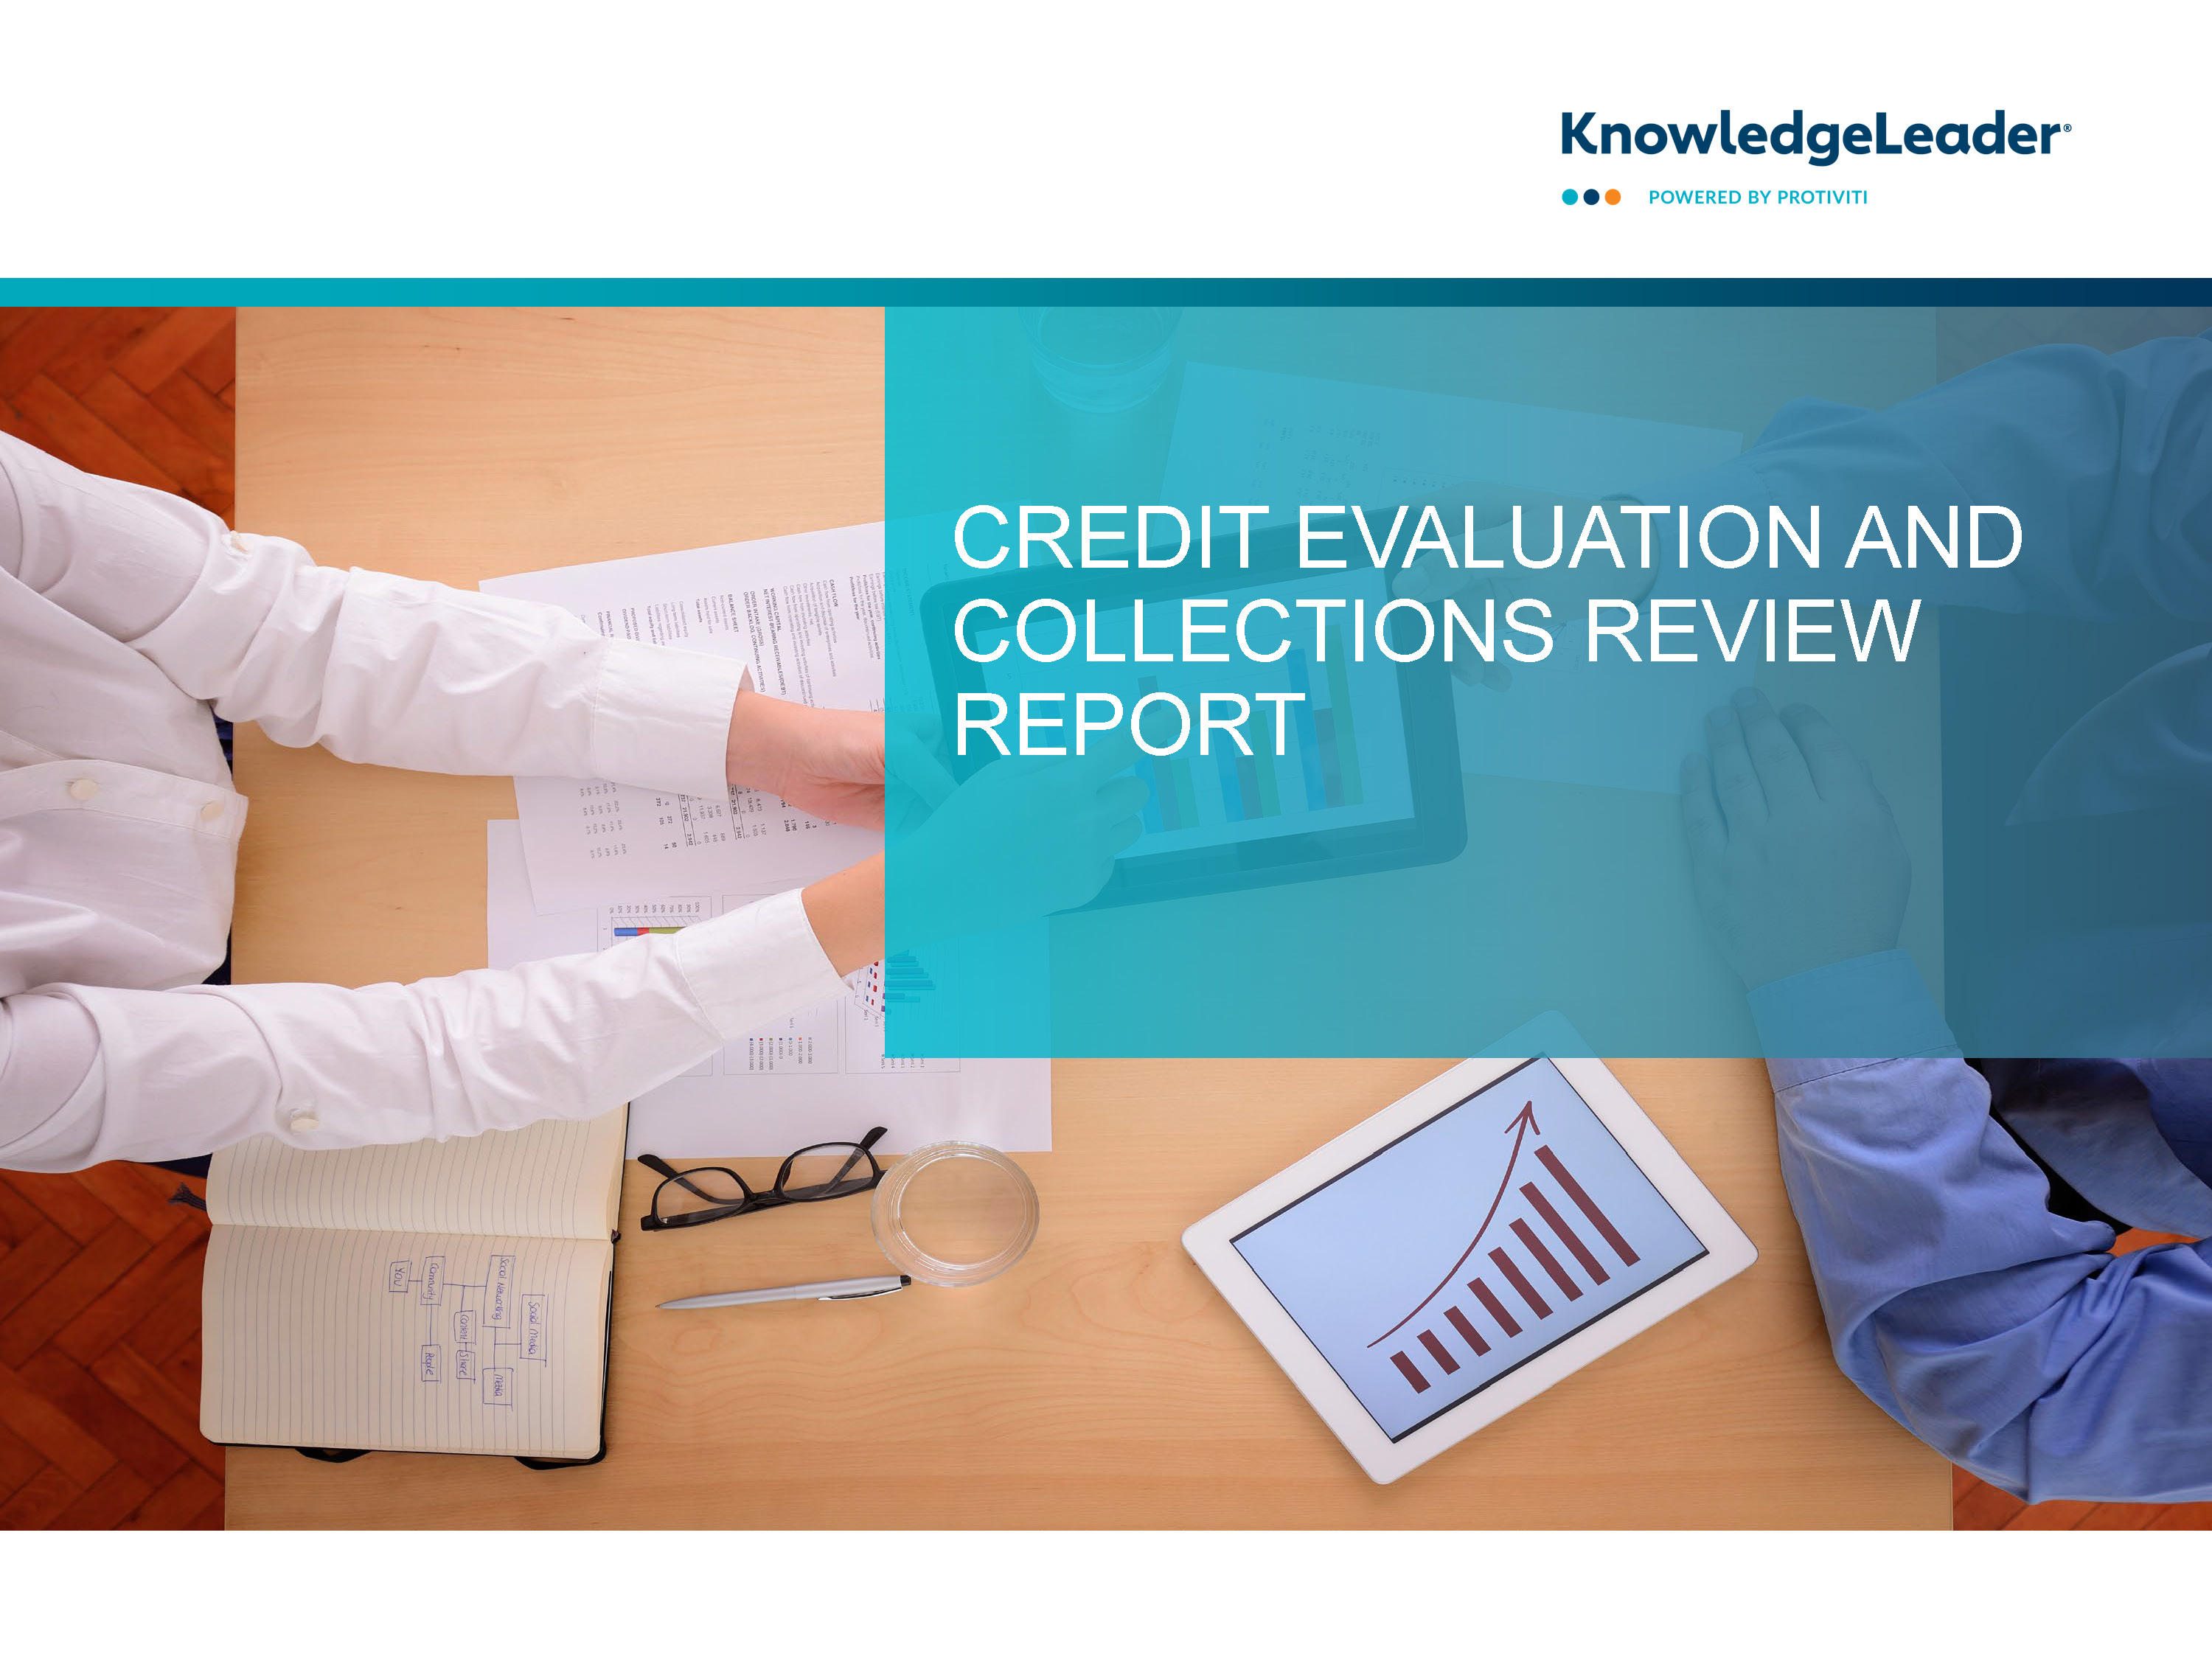 Screenshot of the first page of Credit Evaluation and Collections Review Report